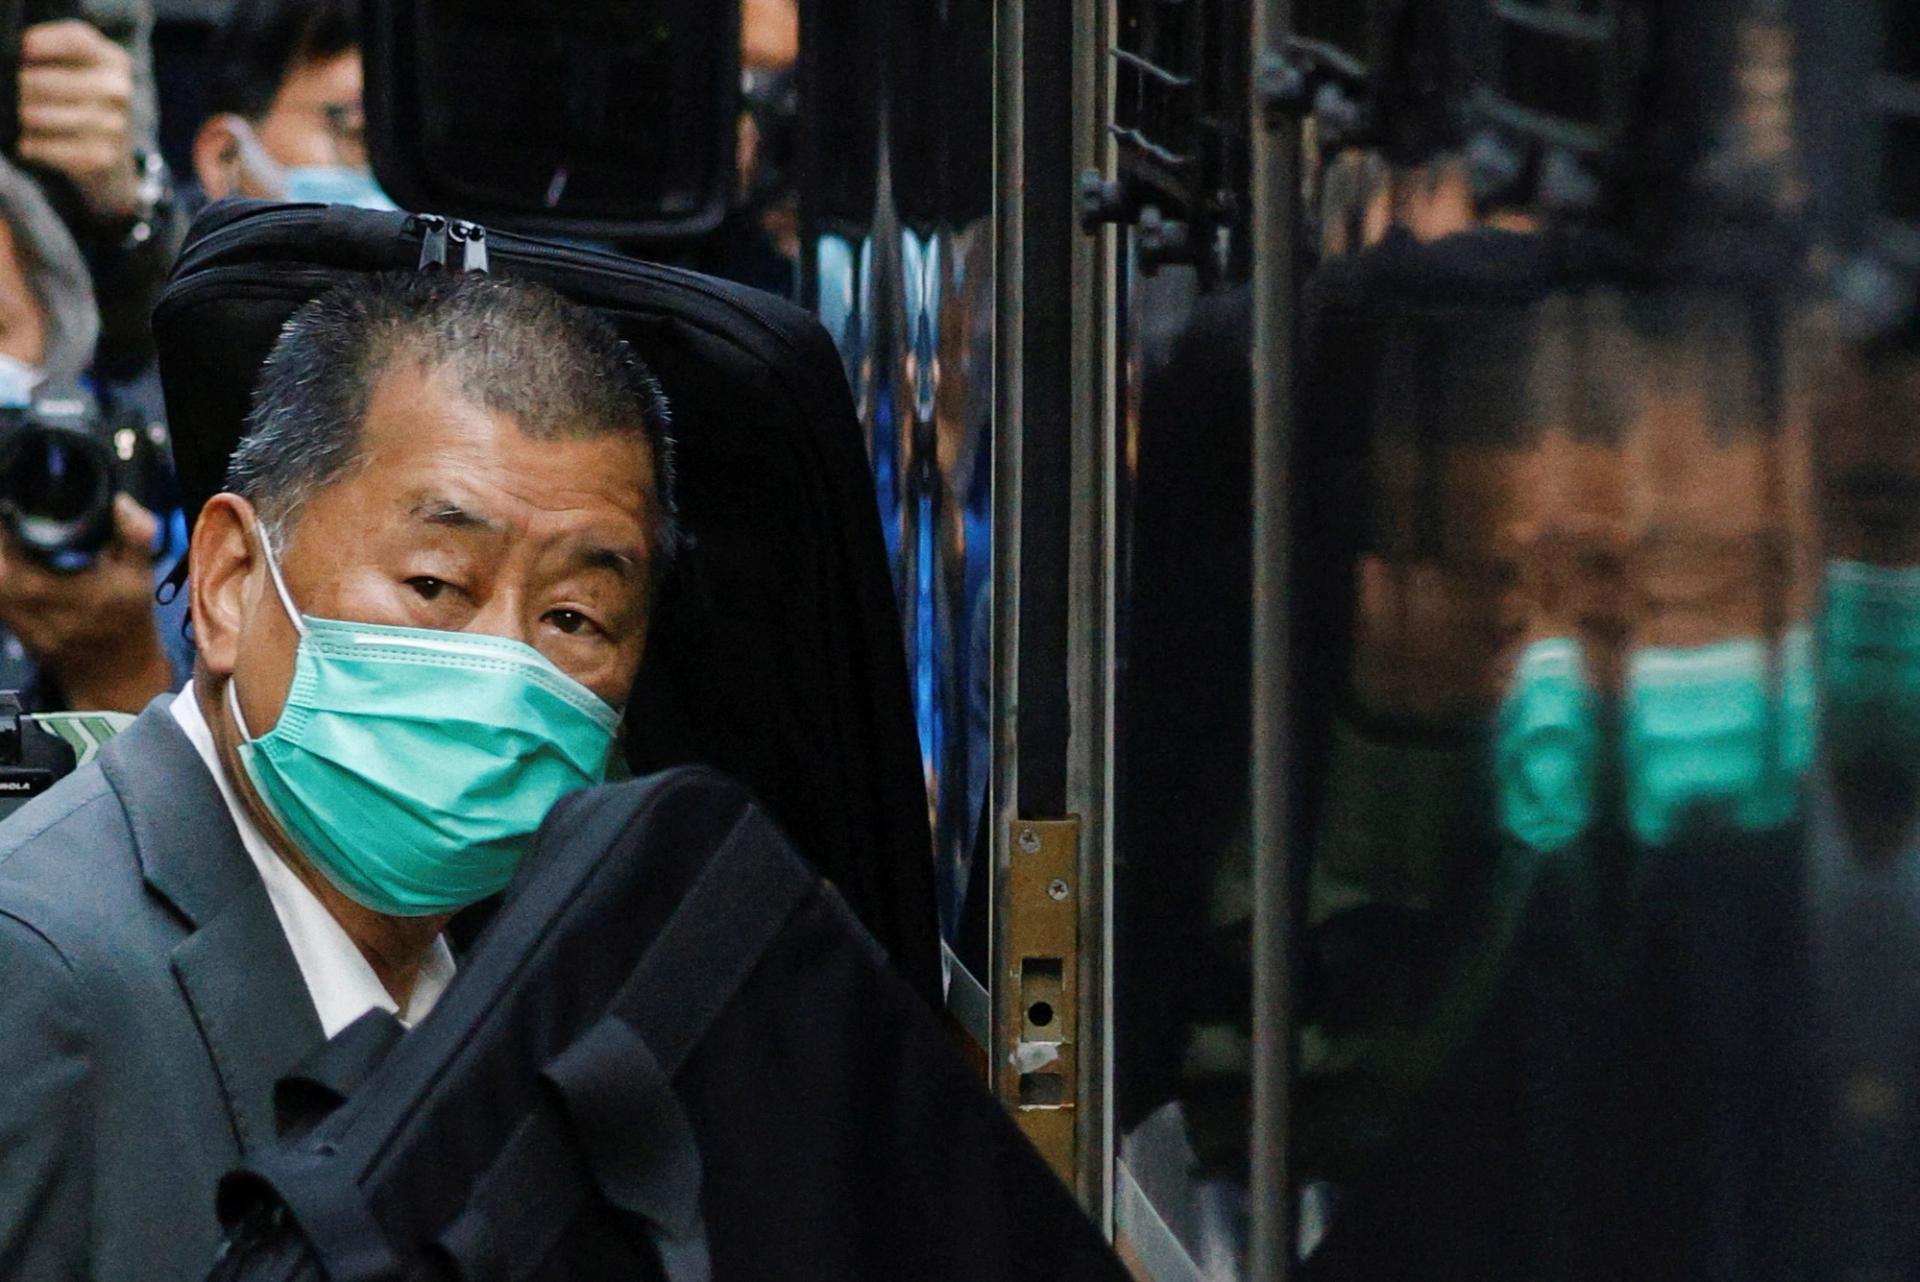 Media tycoon Jimmy Lai, founder of Apple Daily, looks on as he leaves the Court of Final Appeal by prison van, in Hong Kong on February 1, 2021.